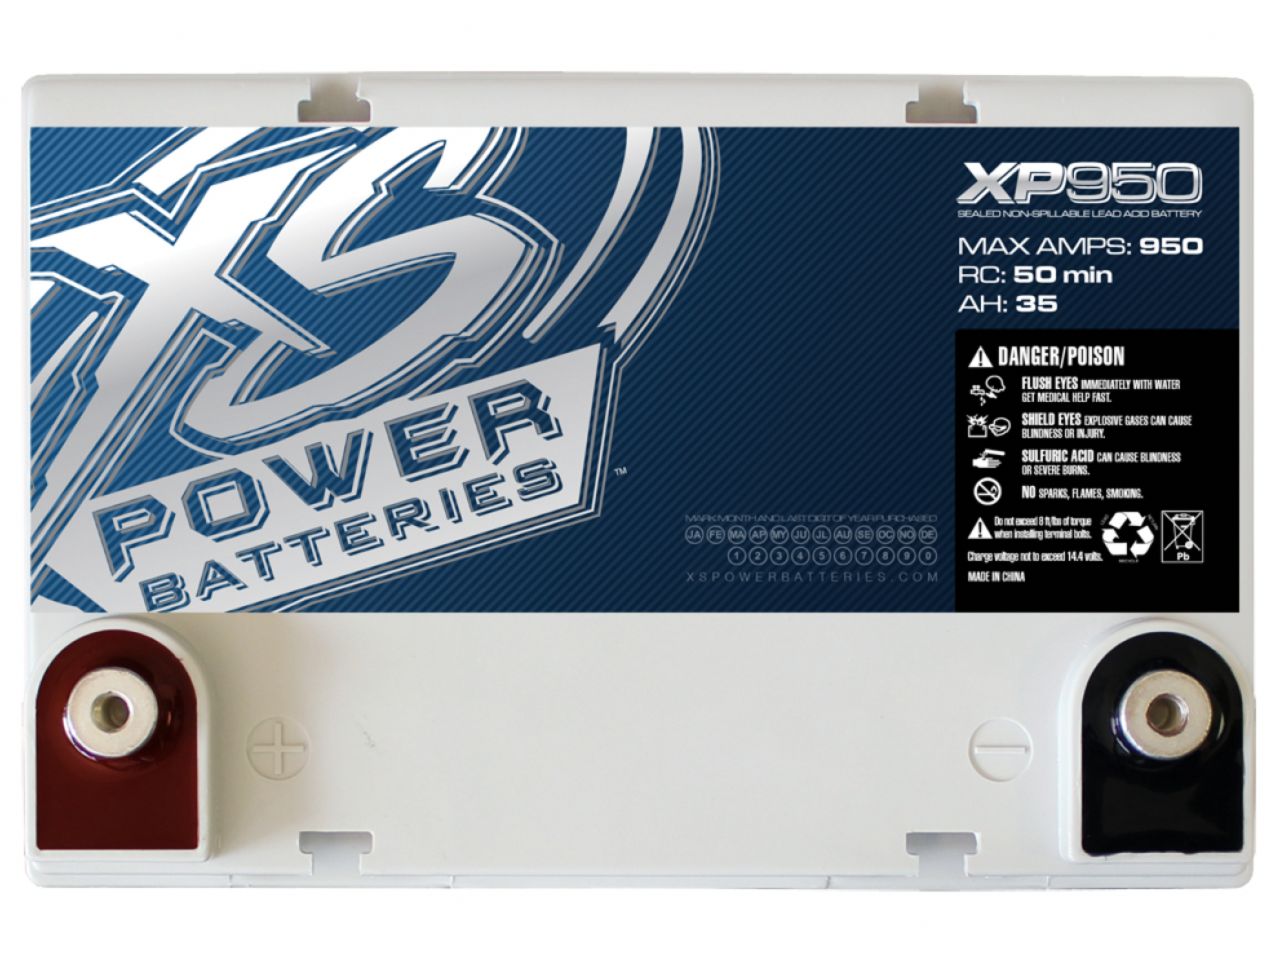 XS Power 12V AGM Battery, Max Amps 950A, Ah: 35, RC: 50, 950W